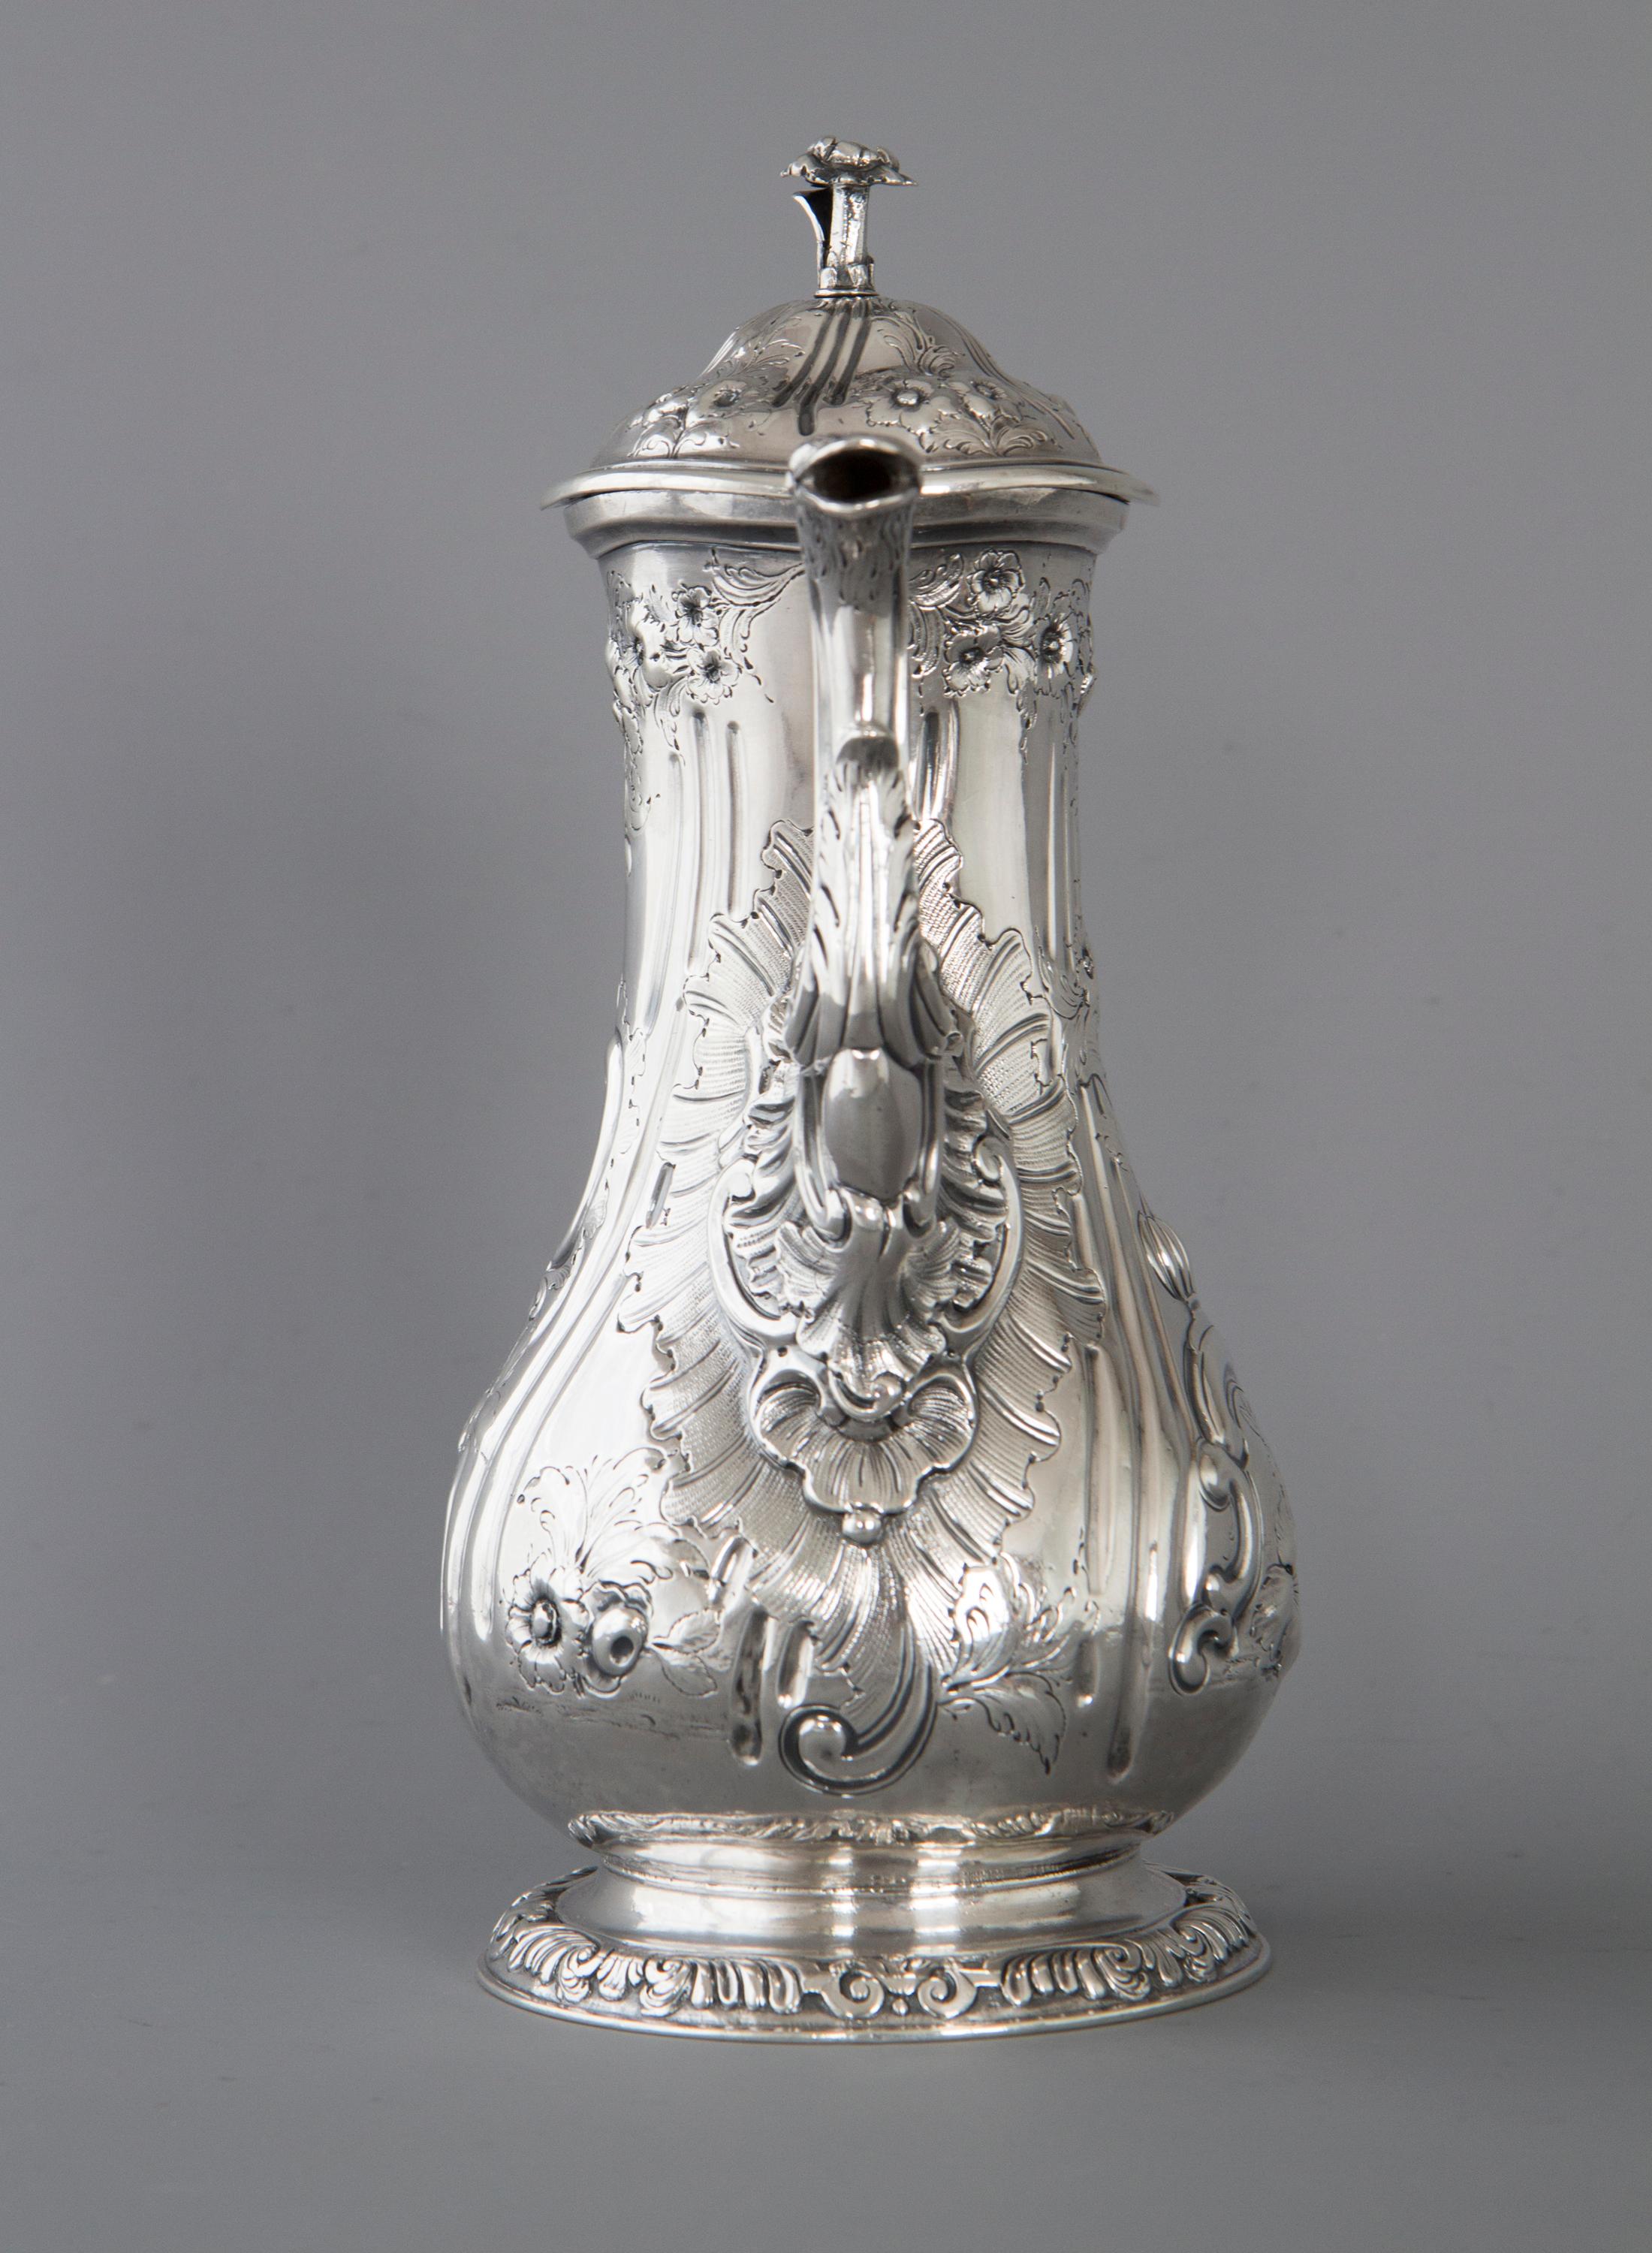 British Georgian Silver Coffee Pot, London, 1760 by Herne & Butty